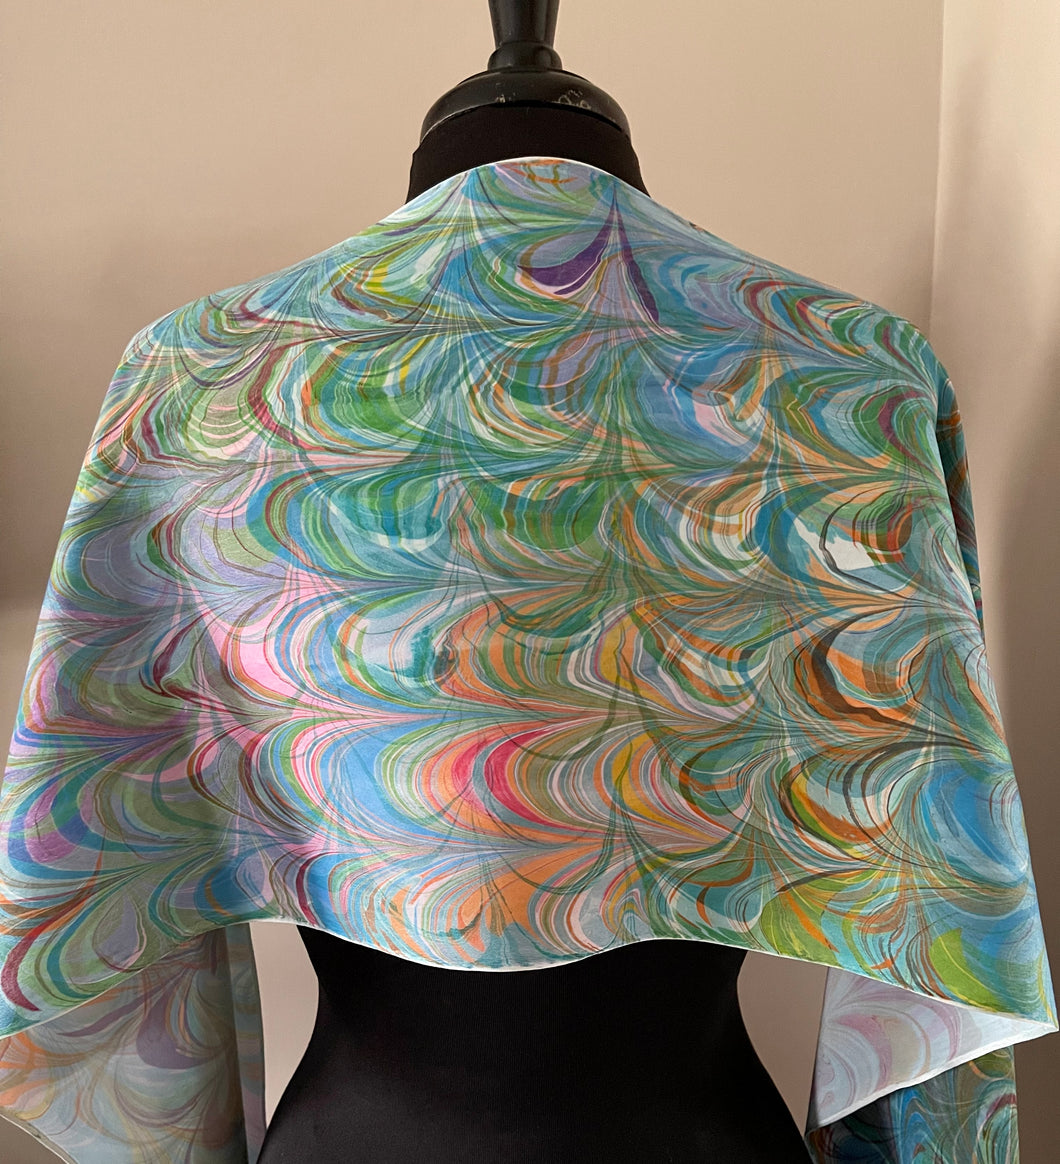 Double marbled  blue orange pink  Charmeuse  Silk 72x14” bold fun. This beautiful silk makes a unique dresser cover and scarf